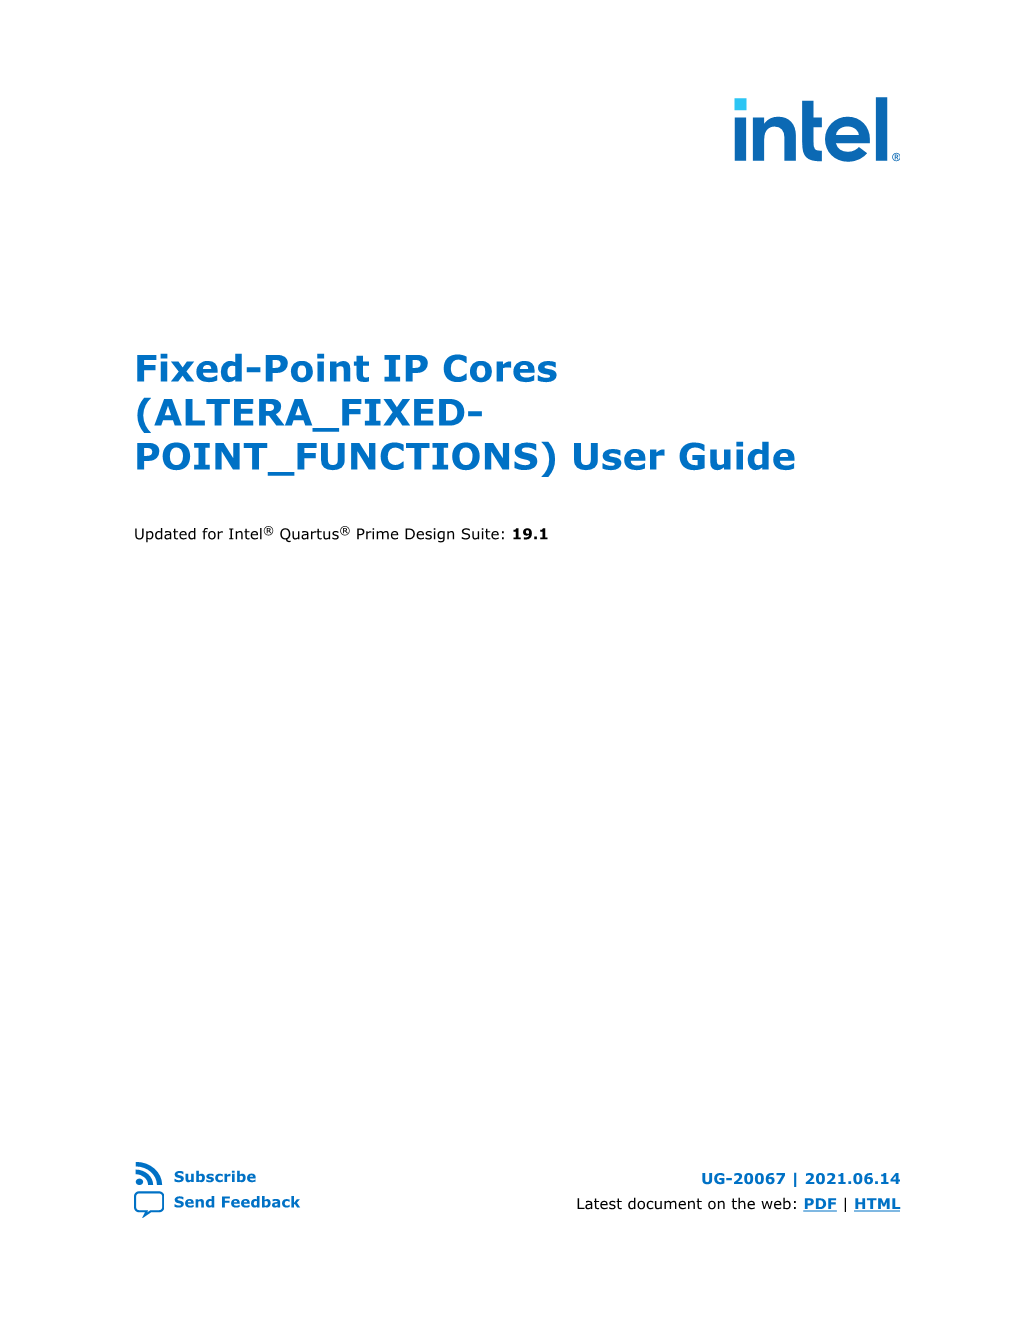 Fixed-Point IP Cores (ALTERA FIXED- POINT FUNCTIONS) User Guide